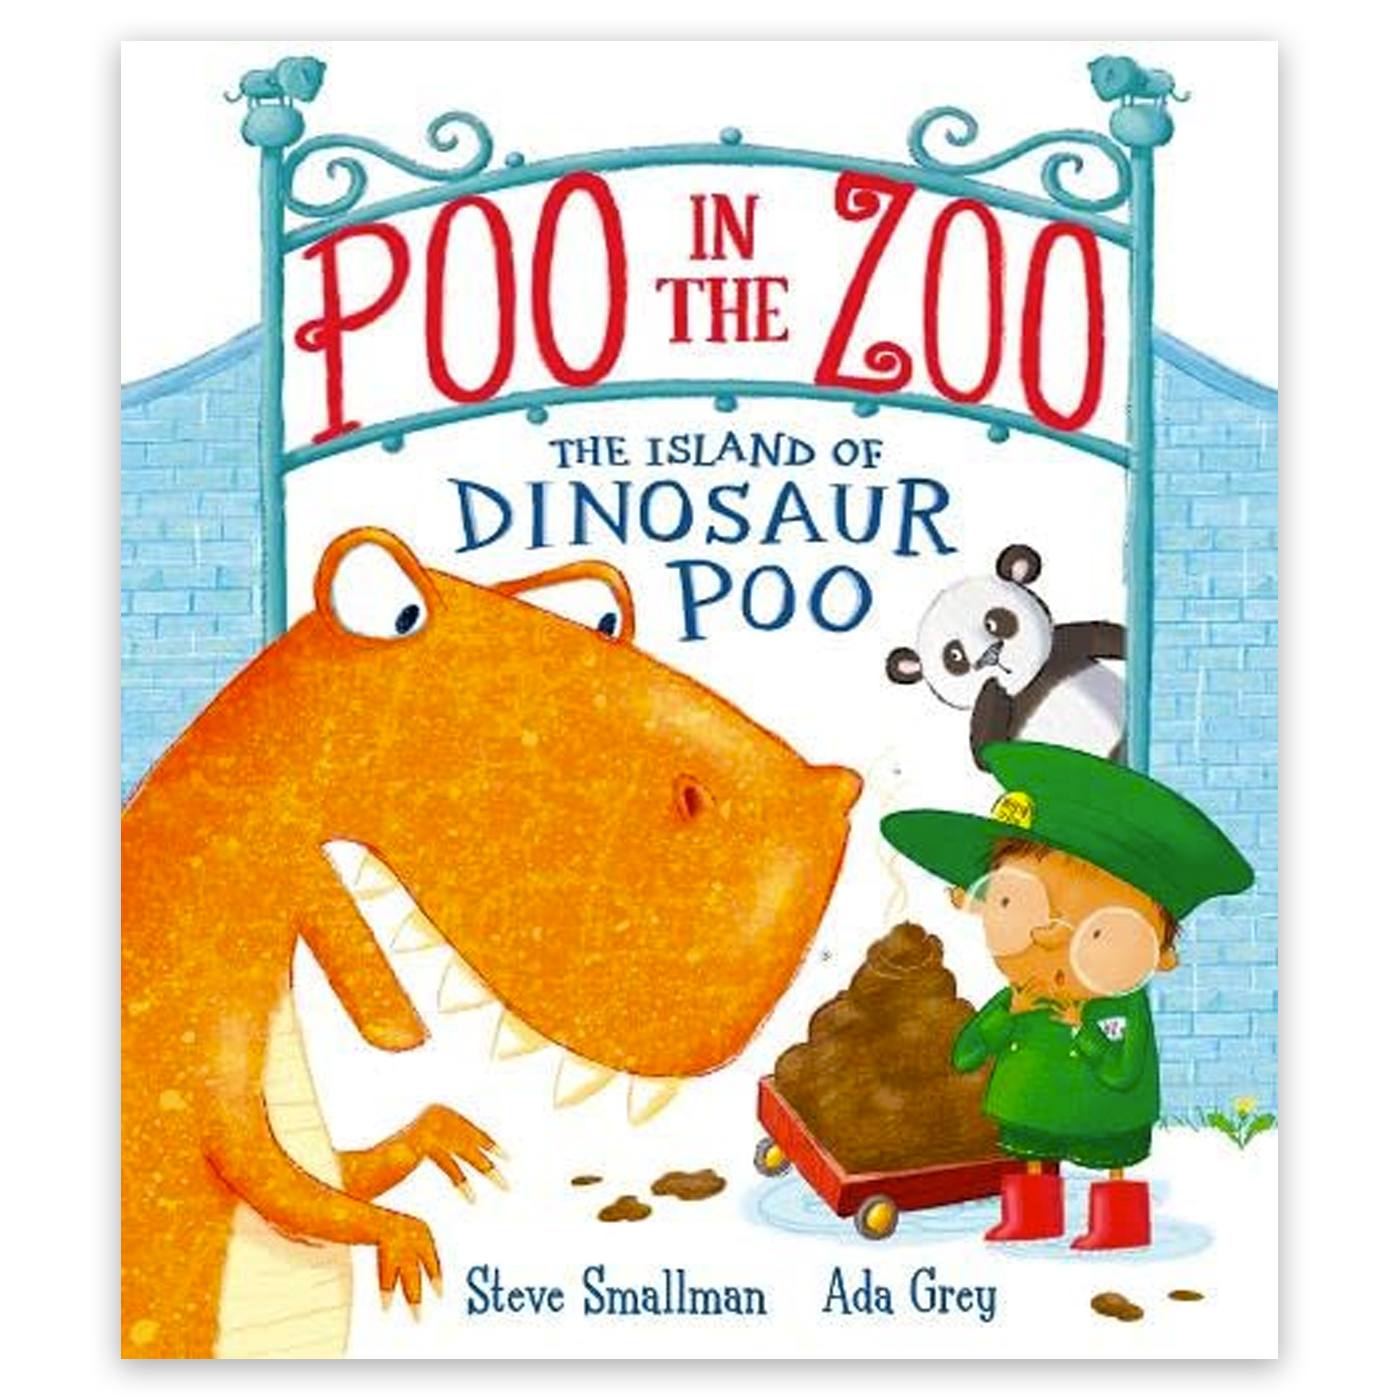  Poo in the Zoo: The Island of Dinosaur Poo